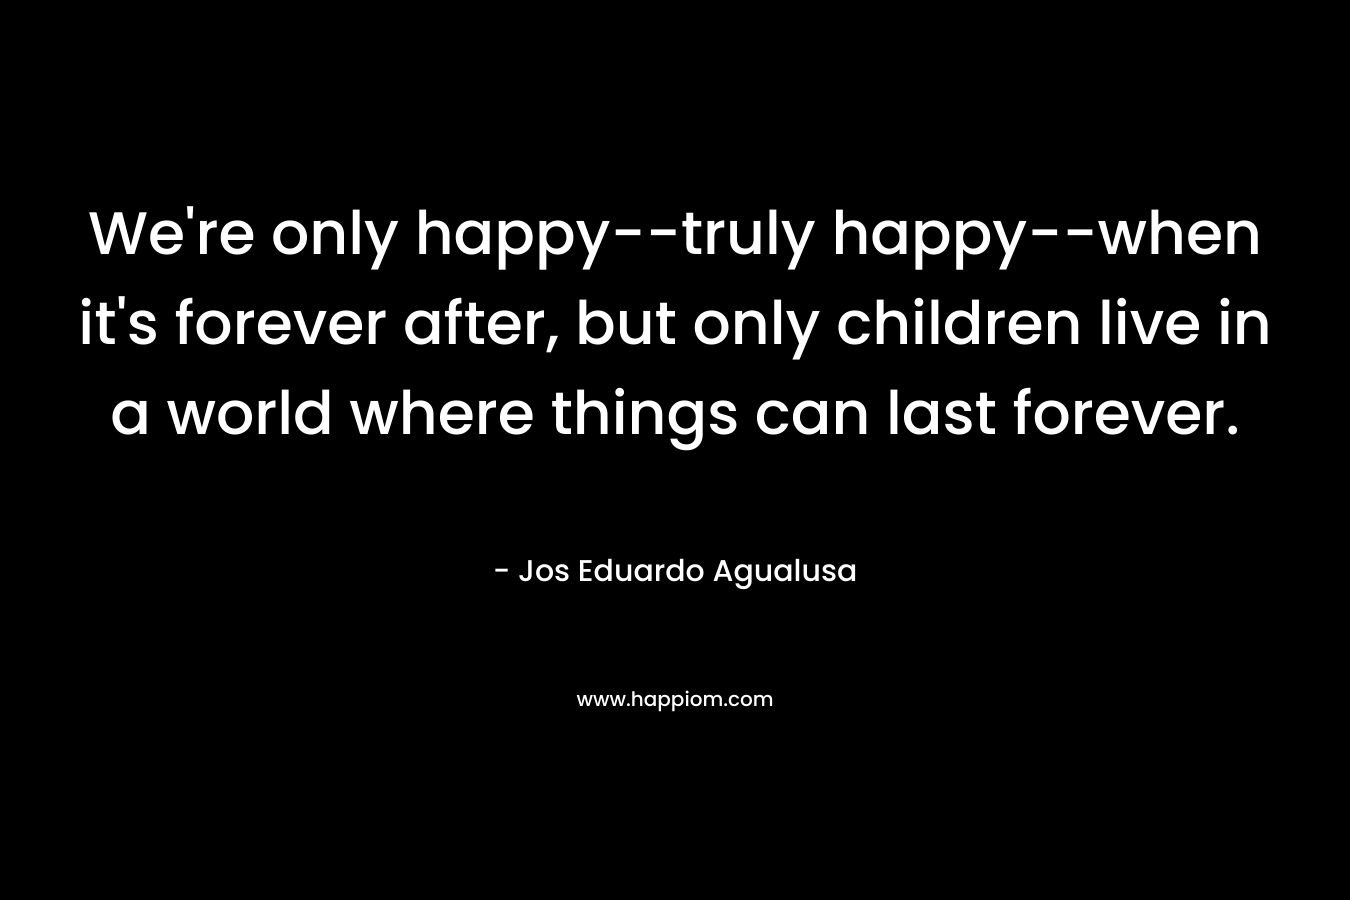 We're only happy--truly happy--when it's forever after, but only children live in a world where things can last forever.